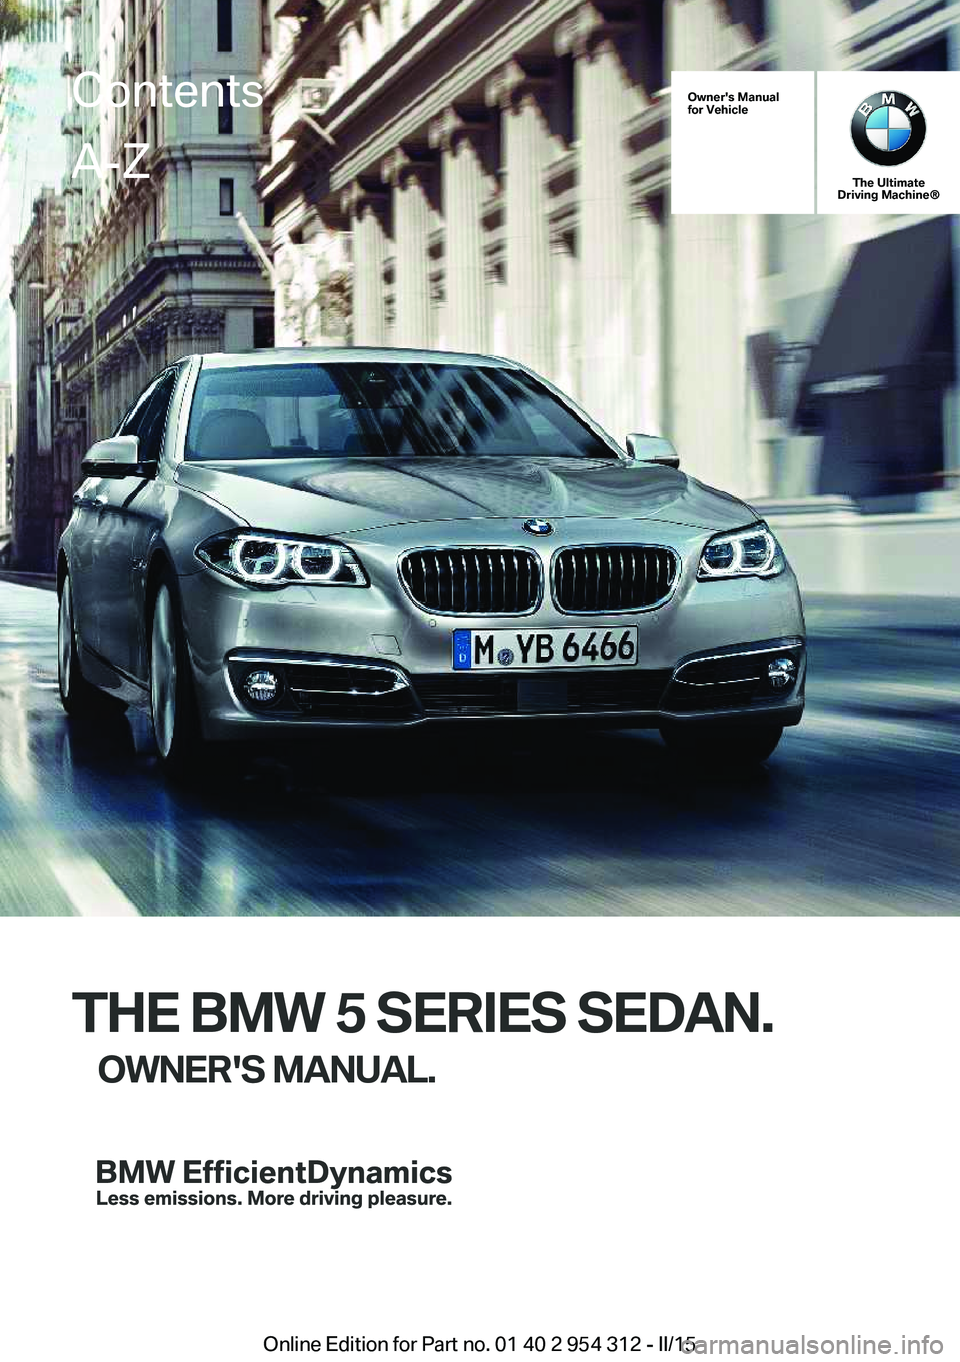 BMW 535D XDRIVE SEDAN 2016  Owners Manual Owner's Manual
for Vehicle
The Ultimate
Driving Machine®
THE BMW 5 SERIES SEDAN.
OWNER'S MANUAL.
ContentsA-Z
Online Edition for Part no. 01 40 2 954 312 - II/15   